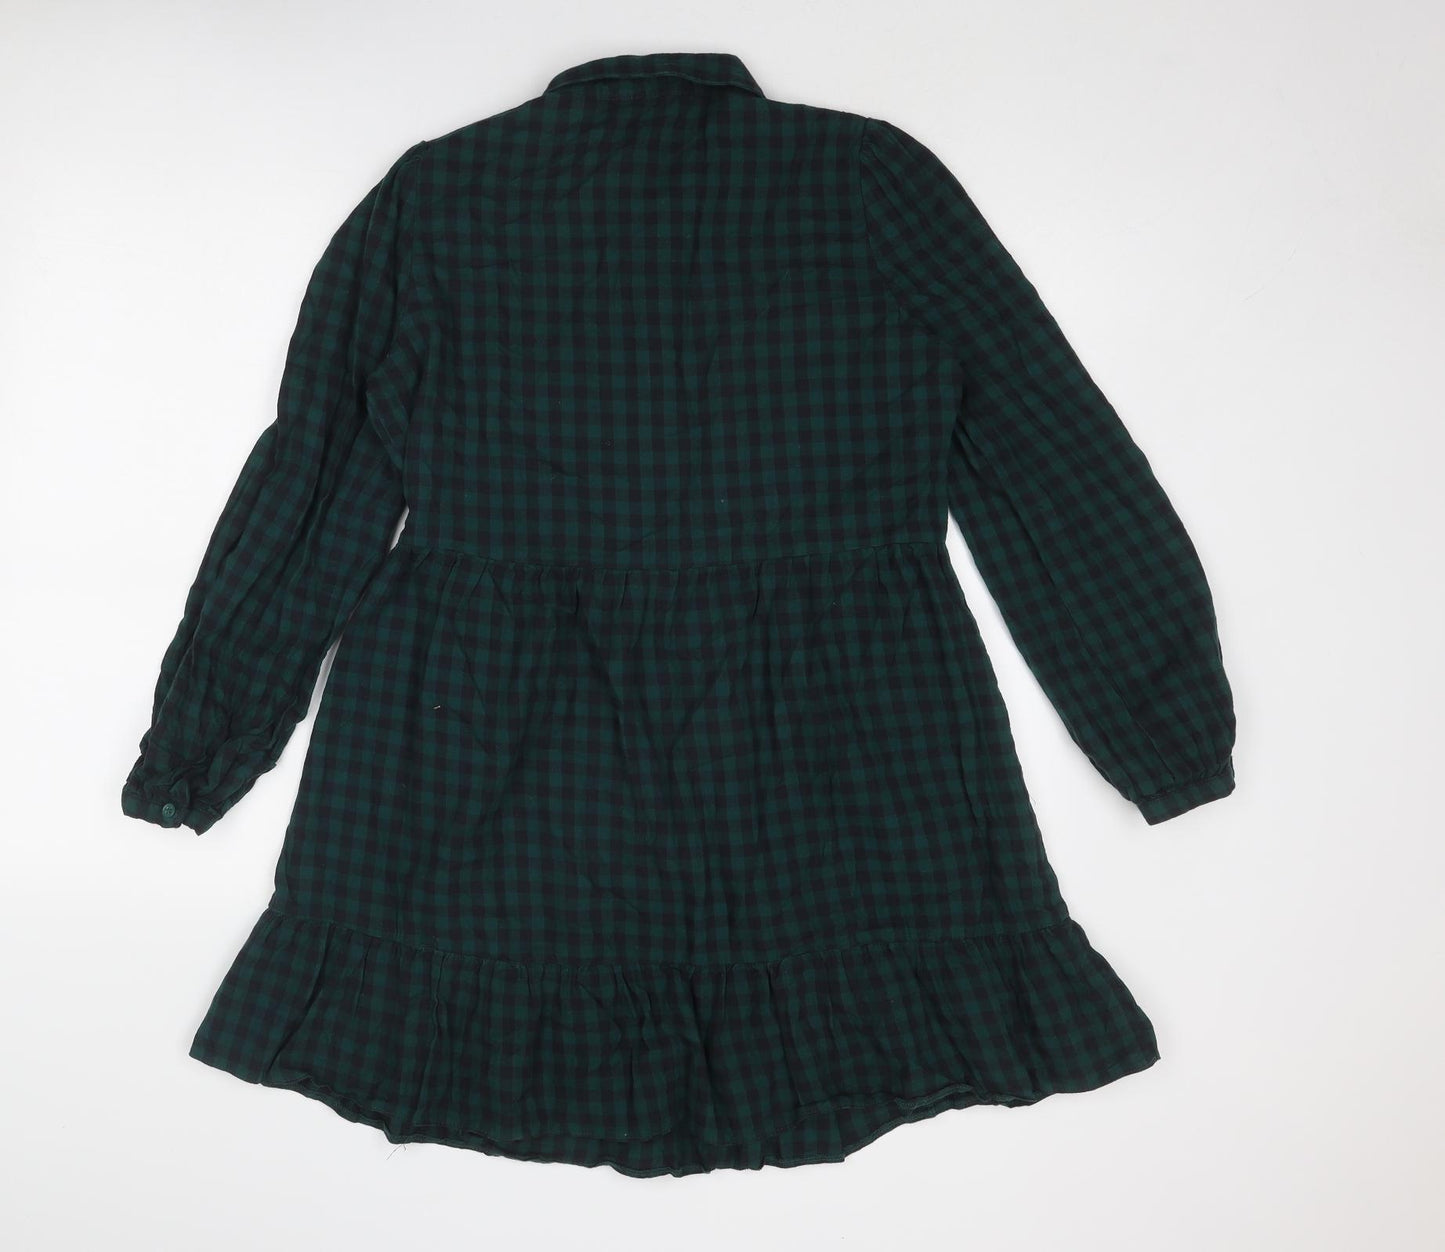 New Look Womens Green Check Cotton Shirt Dress Size 14 Collared Button